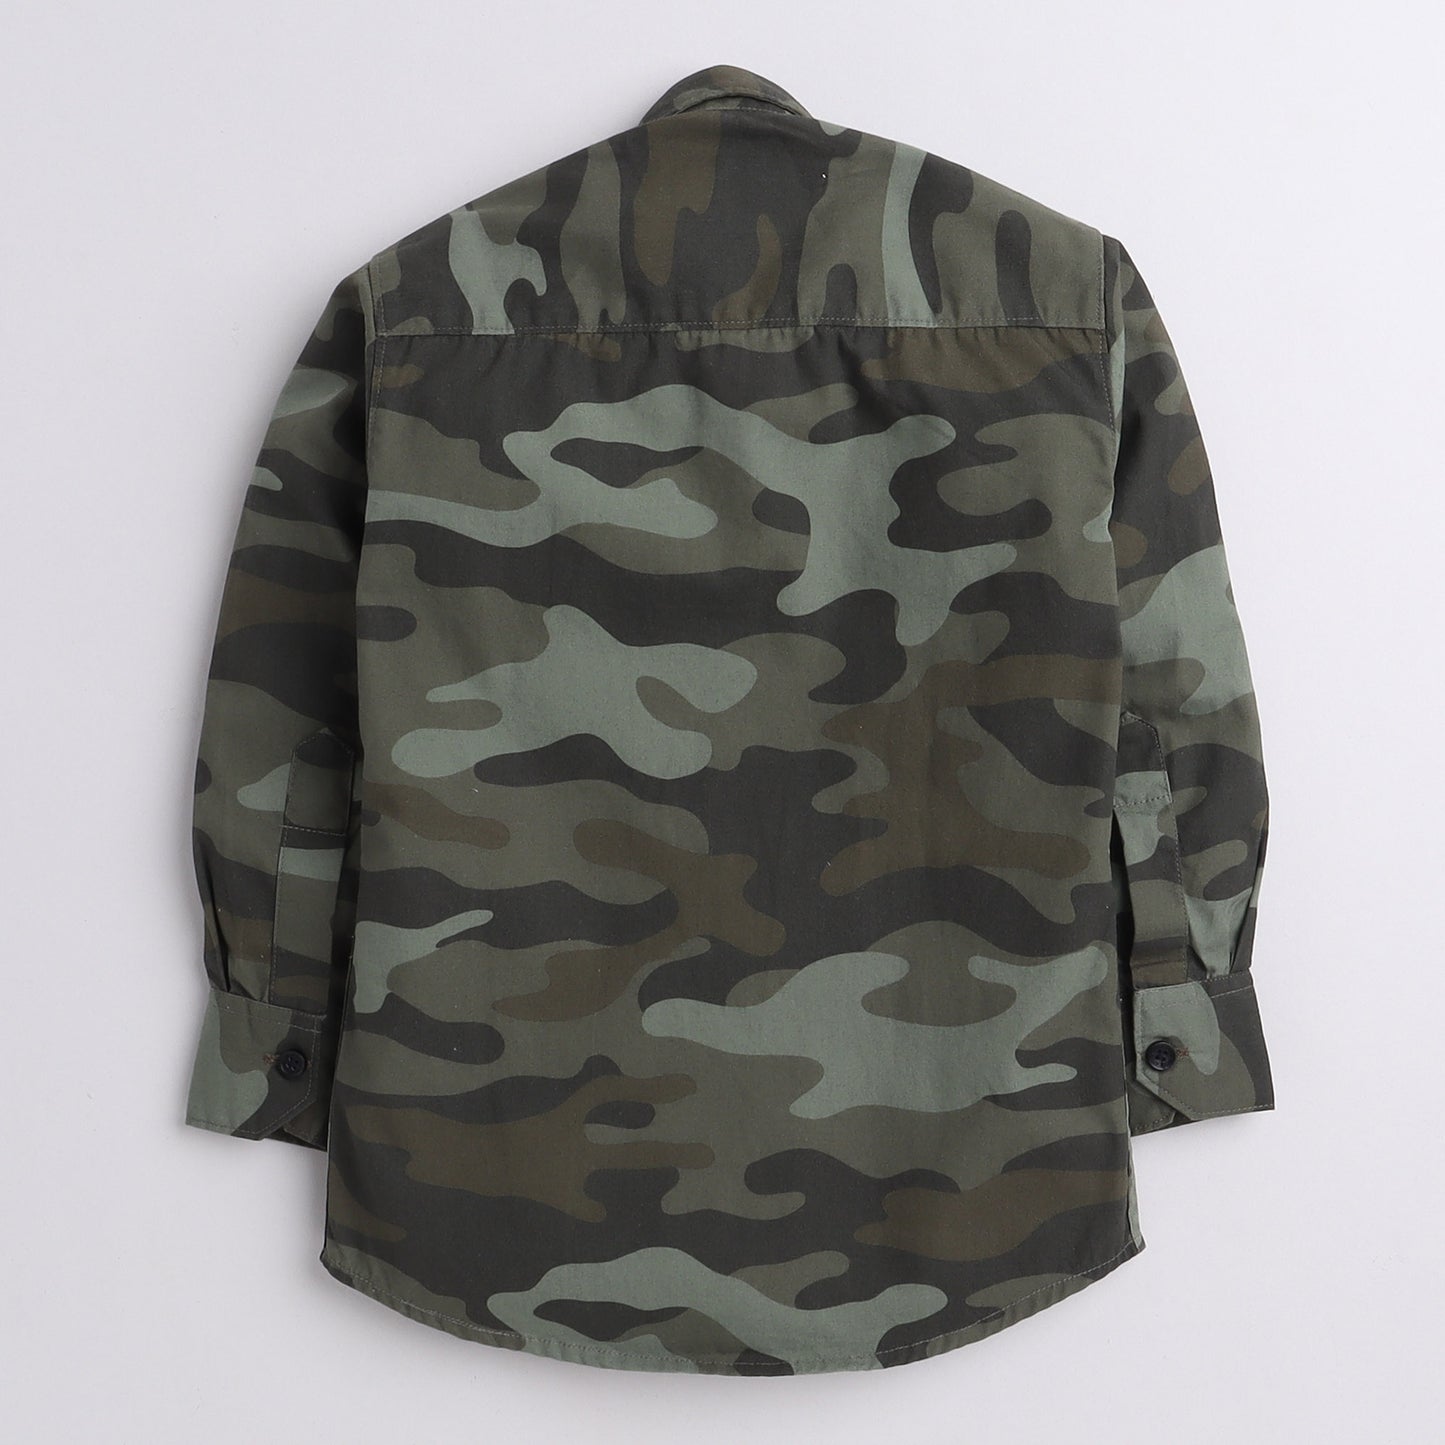 Polka Tots full sleeves shirt military print camouflage  patch  - Green